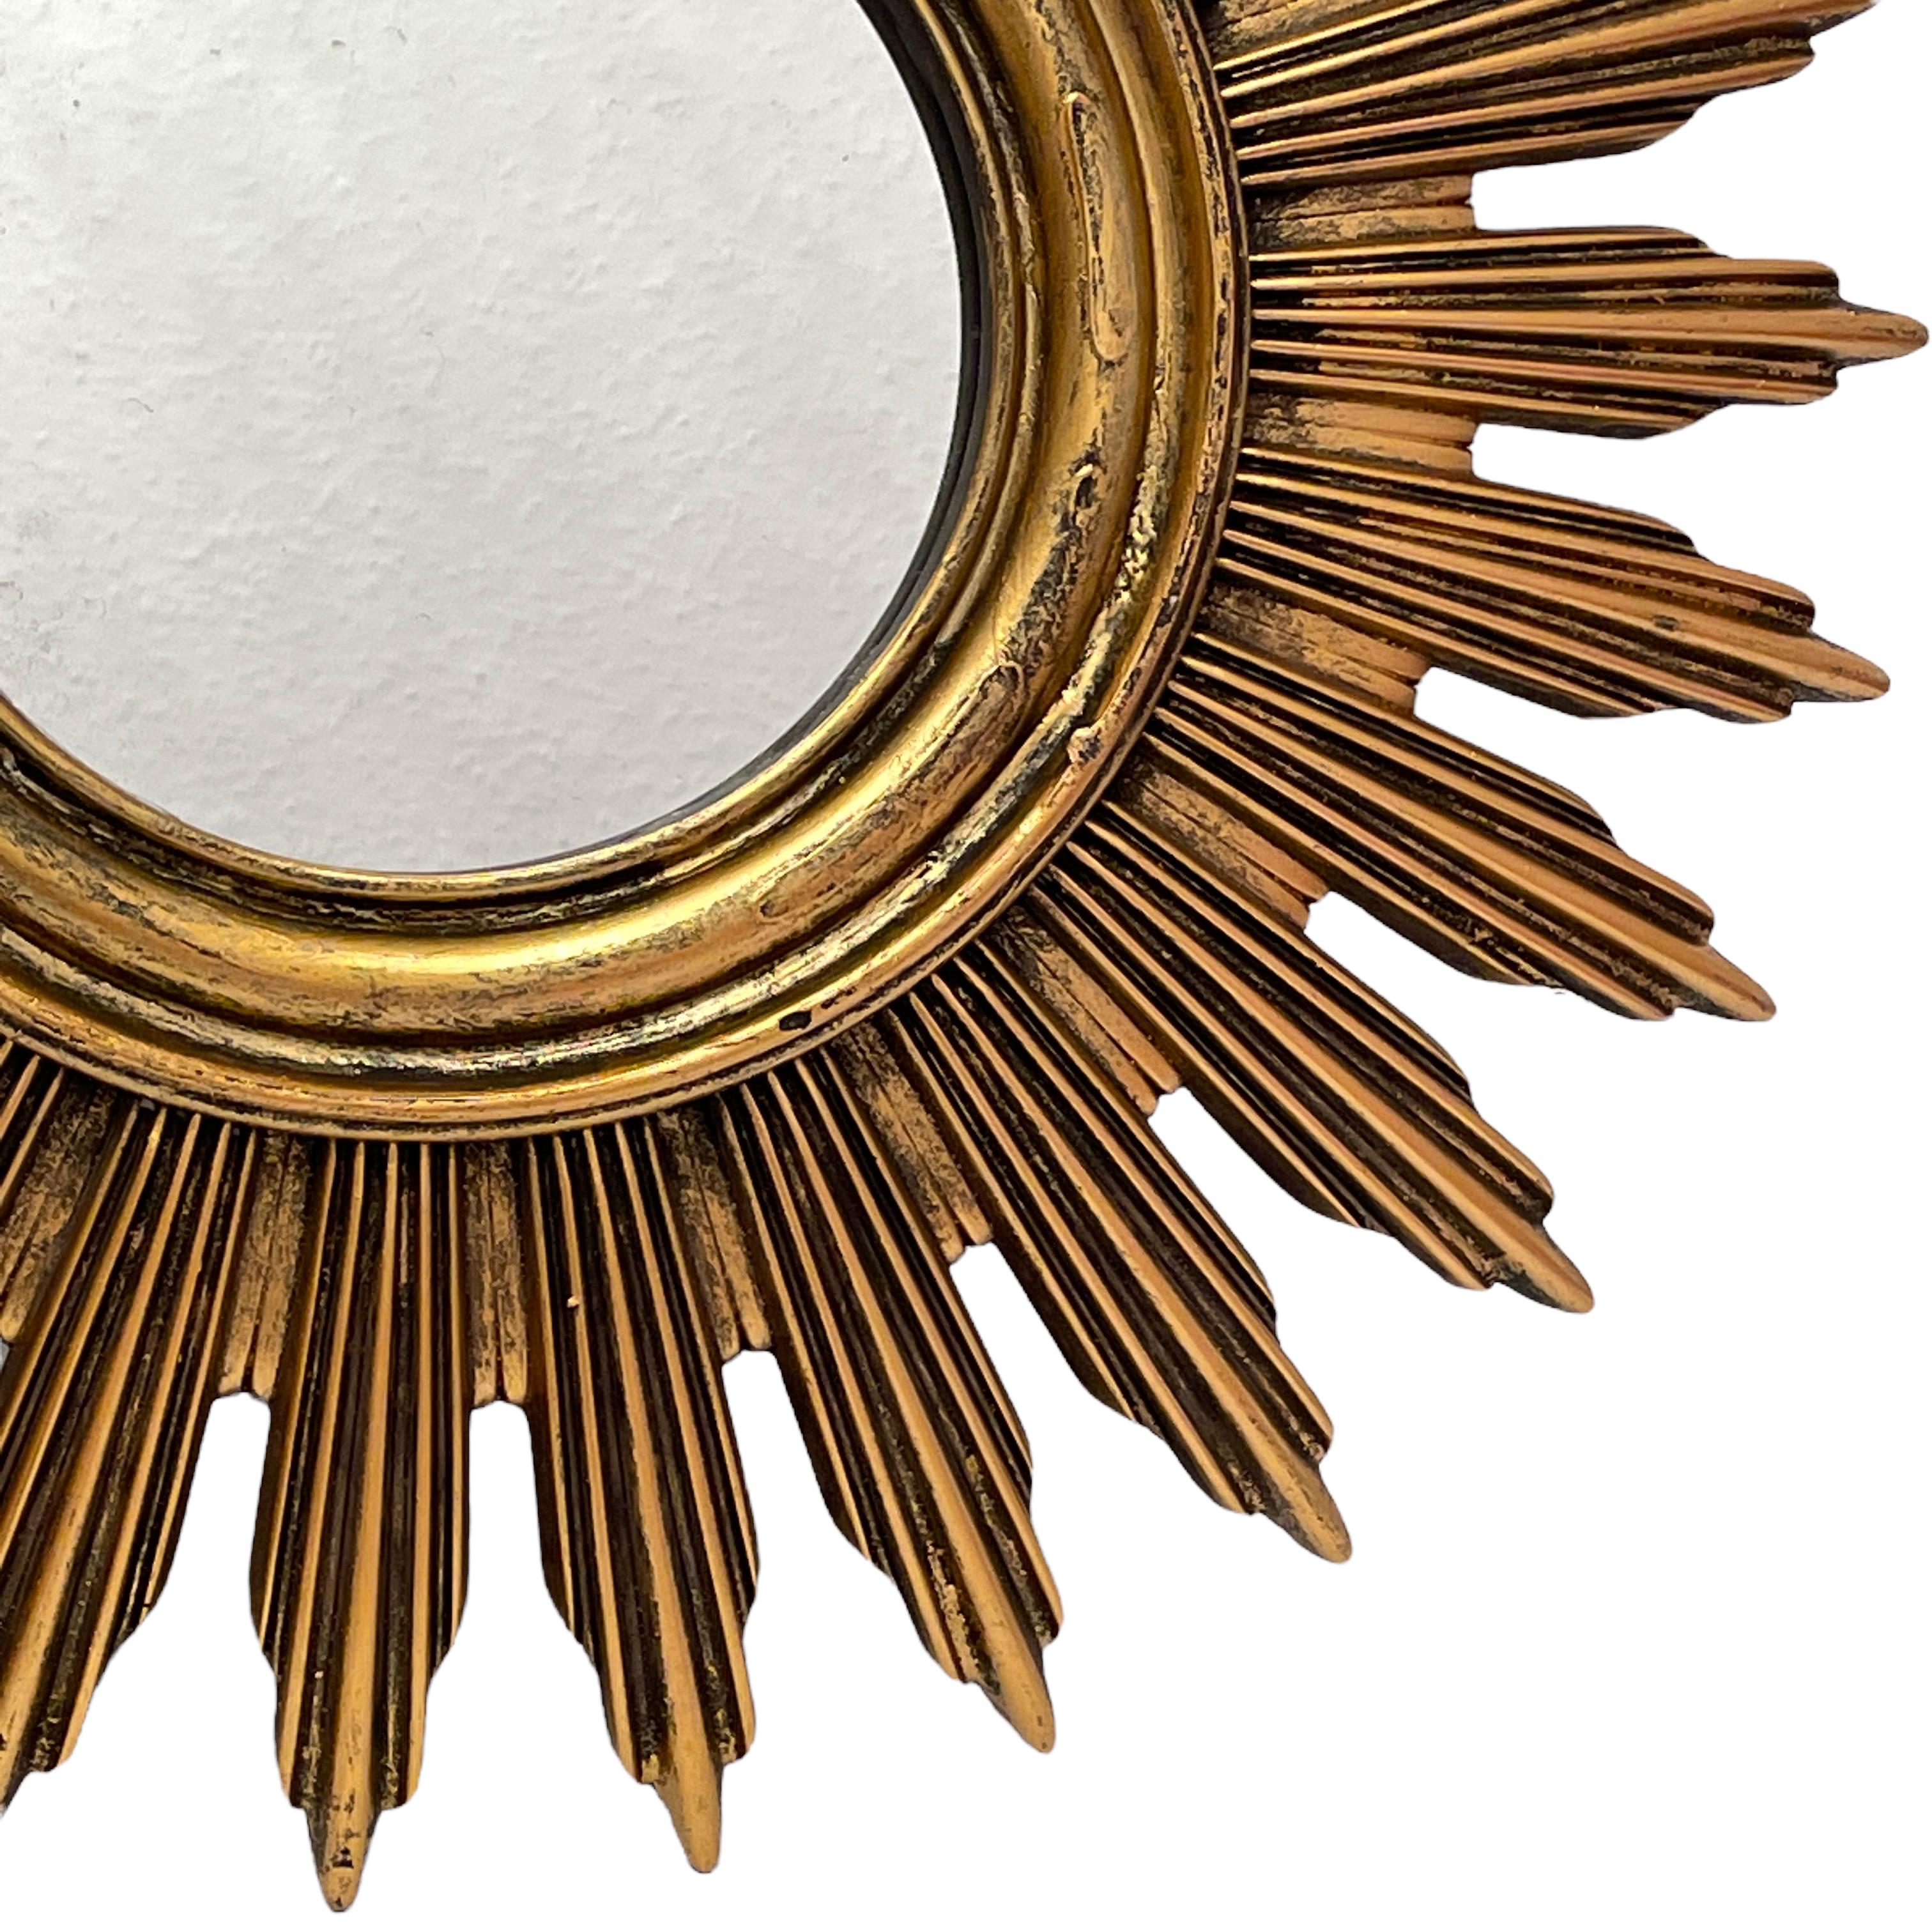 A beautiful starburst sunburst mirror. Made of gilded resin and wood. It measures approximate 20 3/8